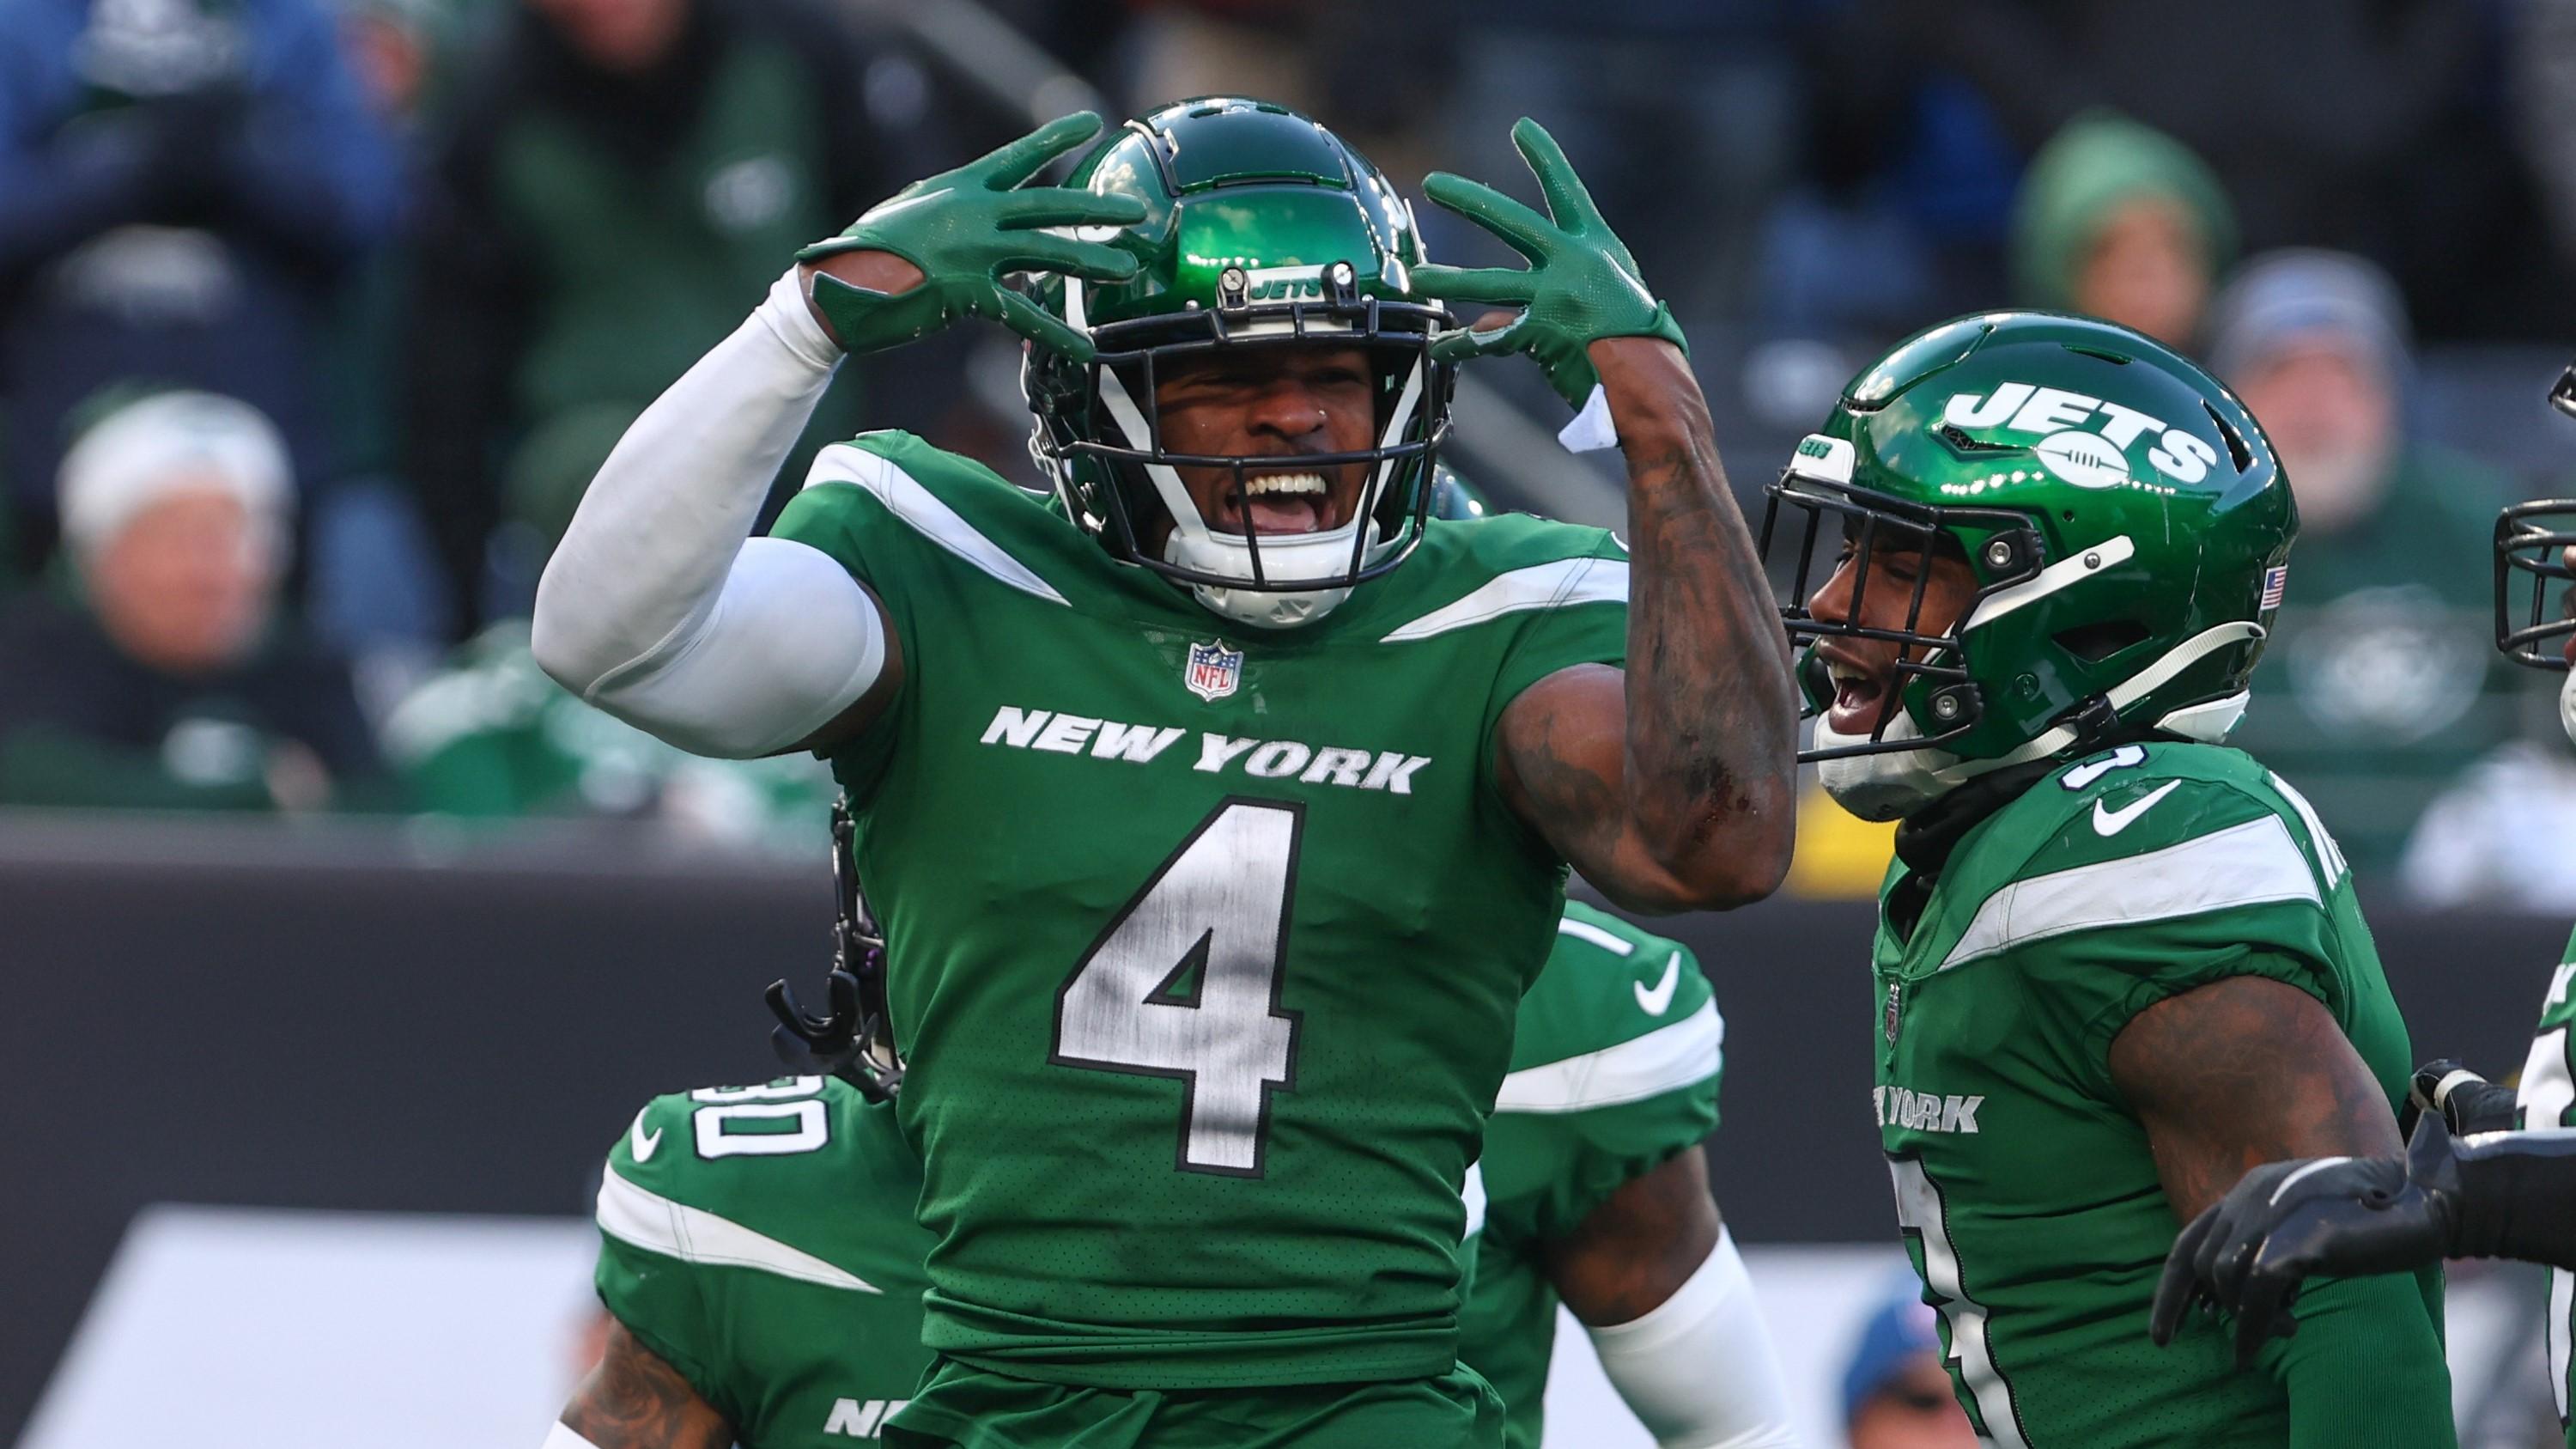 Dec 18, 2022; East Rutherford, New Jersey, USA; New York Jets cornerback D.J. Reed (4) celebrates a defensive stop against the Detroit Lions during the second half at MetLife Stadium. Mandatory Credit: Ed Mulholland-USA TODAY Sports